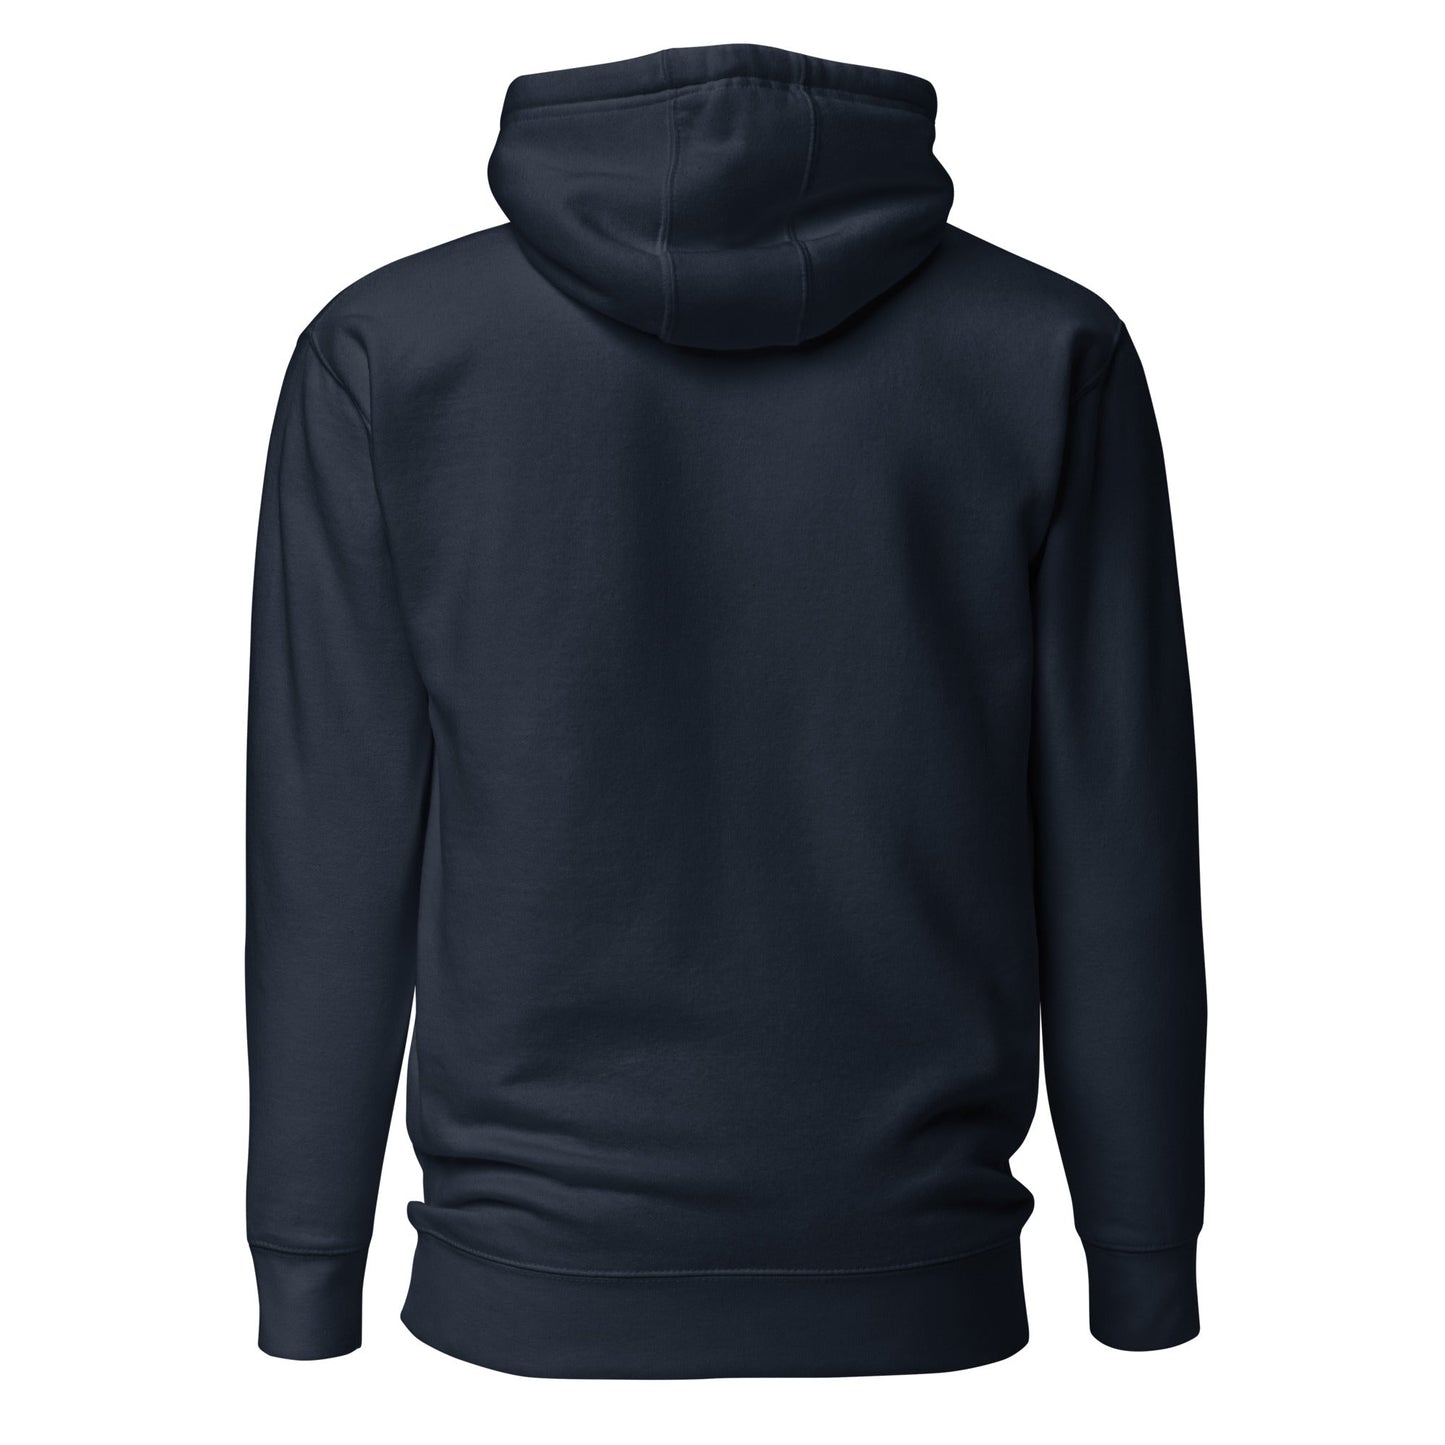 Domain Expansion Anime bestickter Premium Hoodie